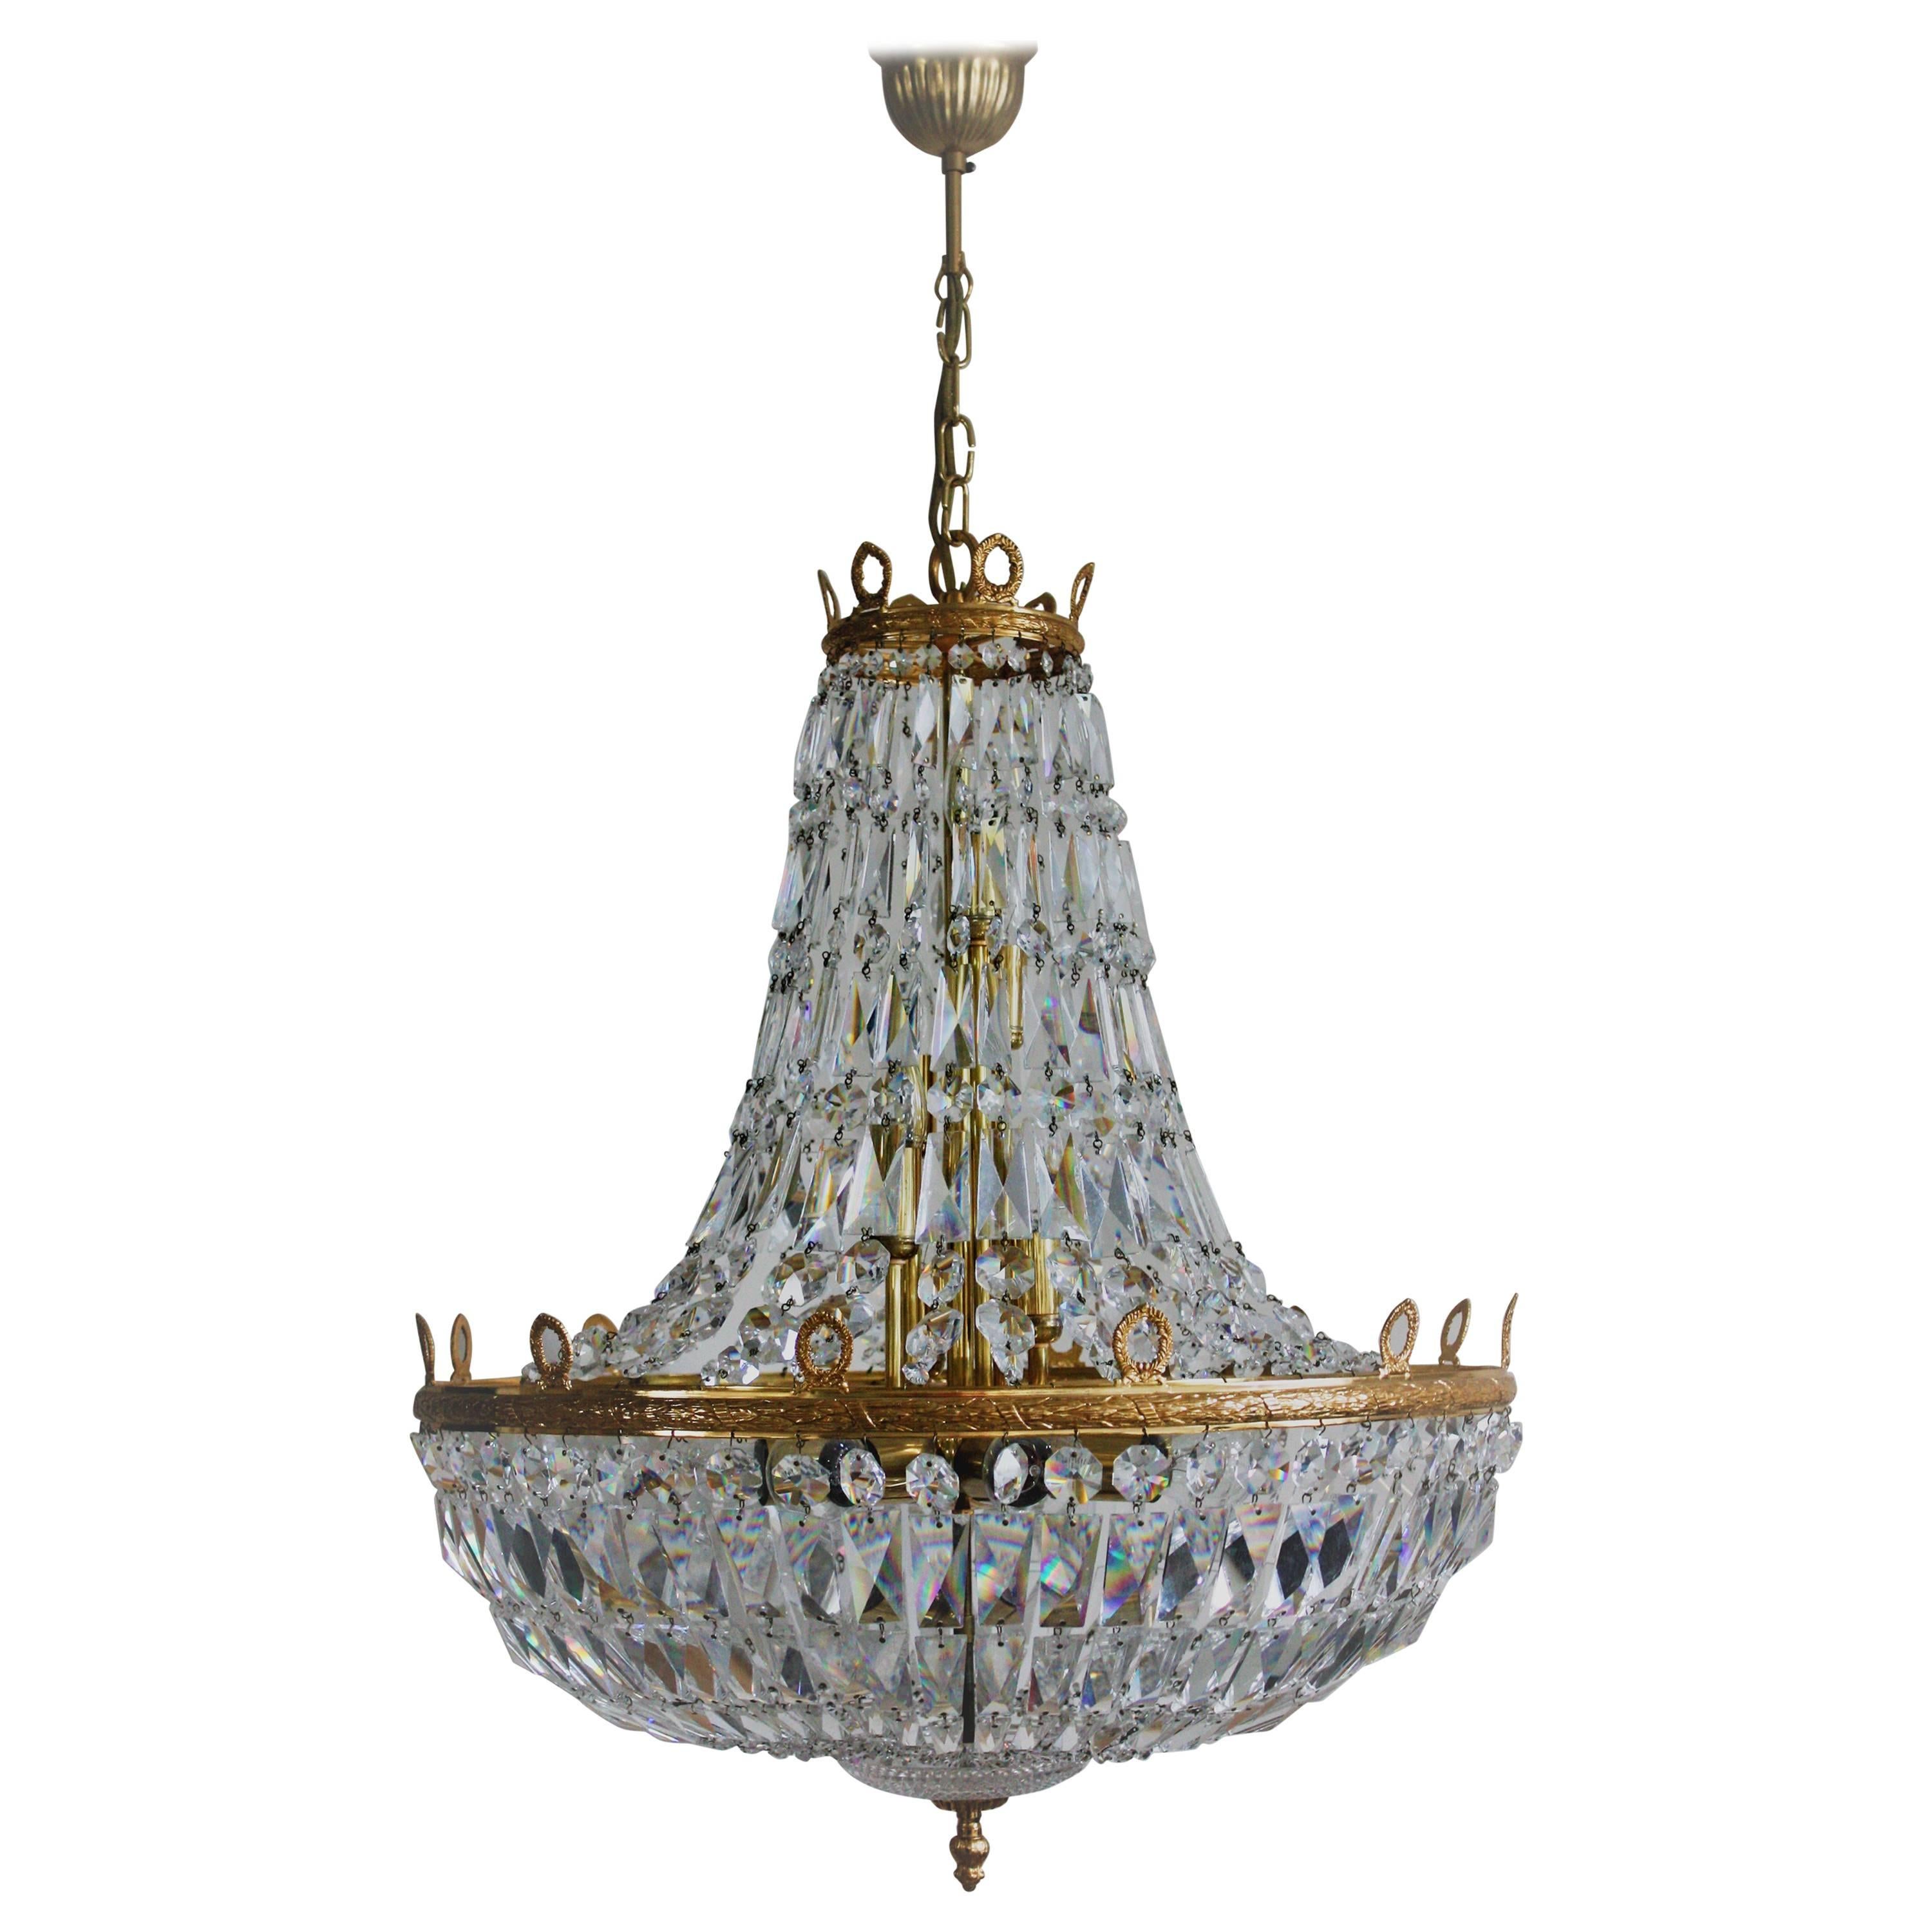 Huge Gold- Plated Empire Style Crystal Chandelier by Palwa, Germany, 1960s